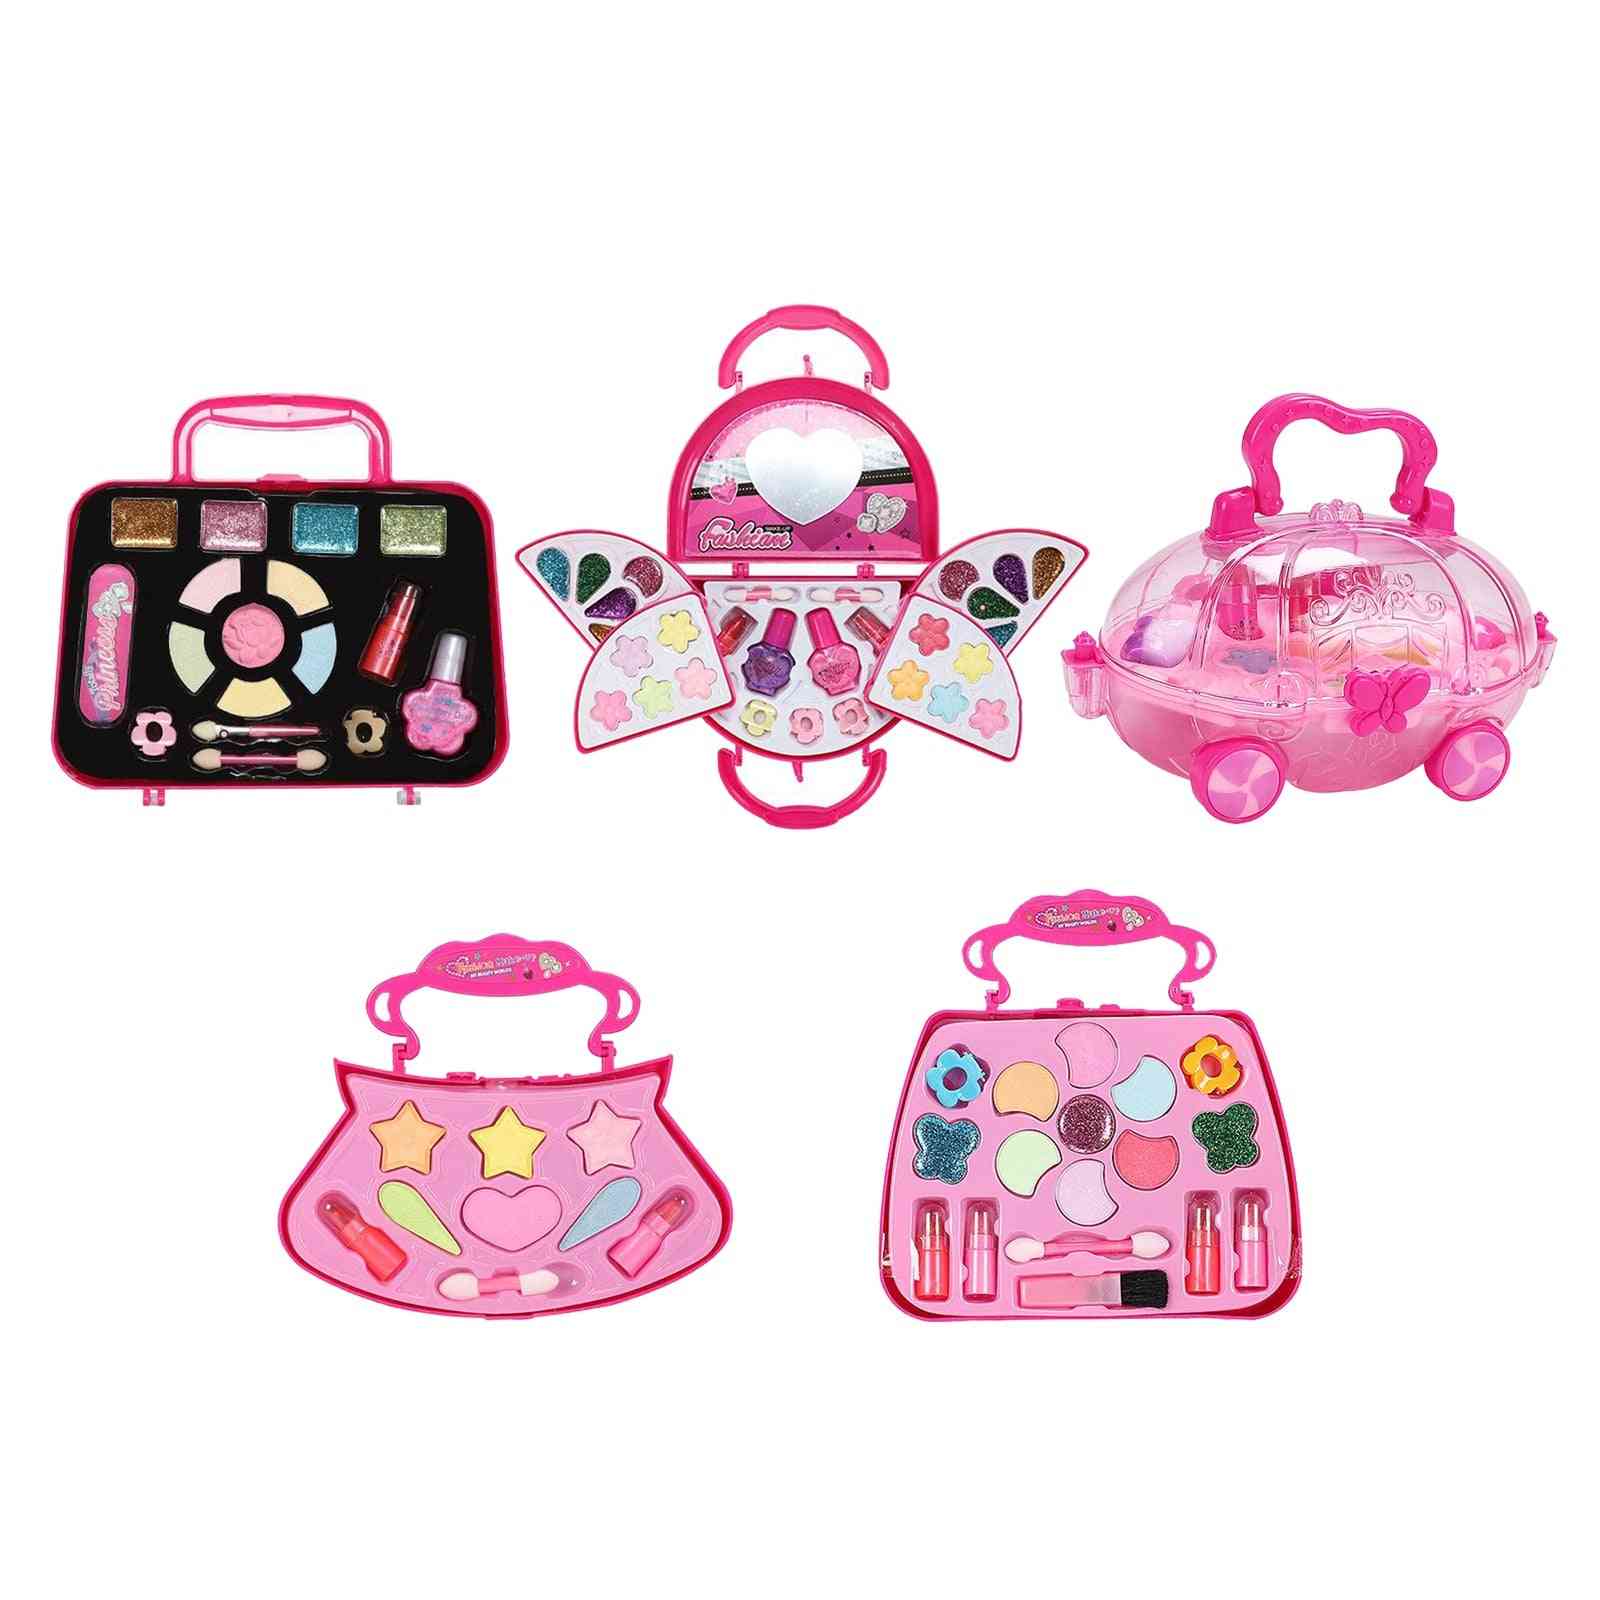 Makeup Case Beauty Cosmetic Princess Toy